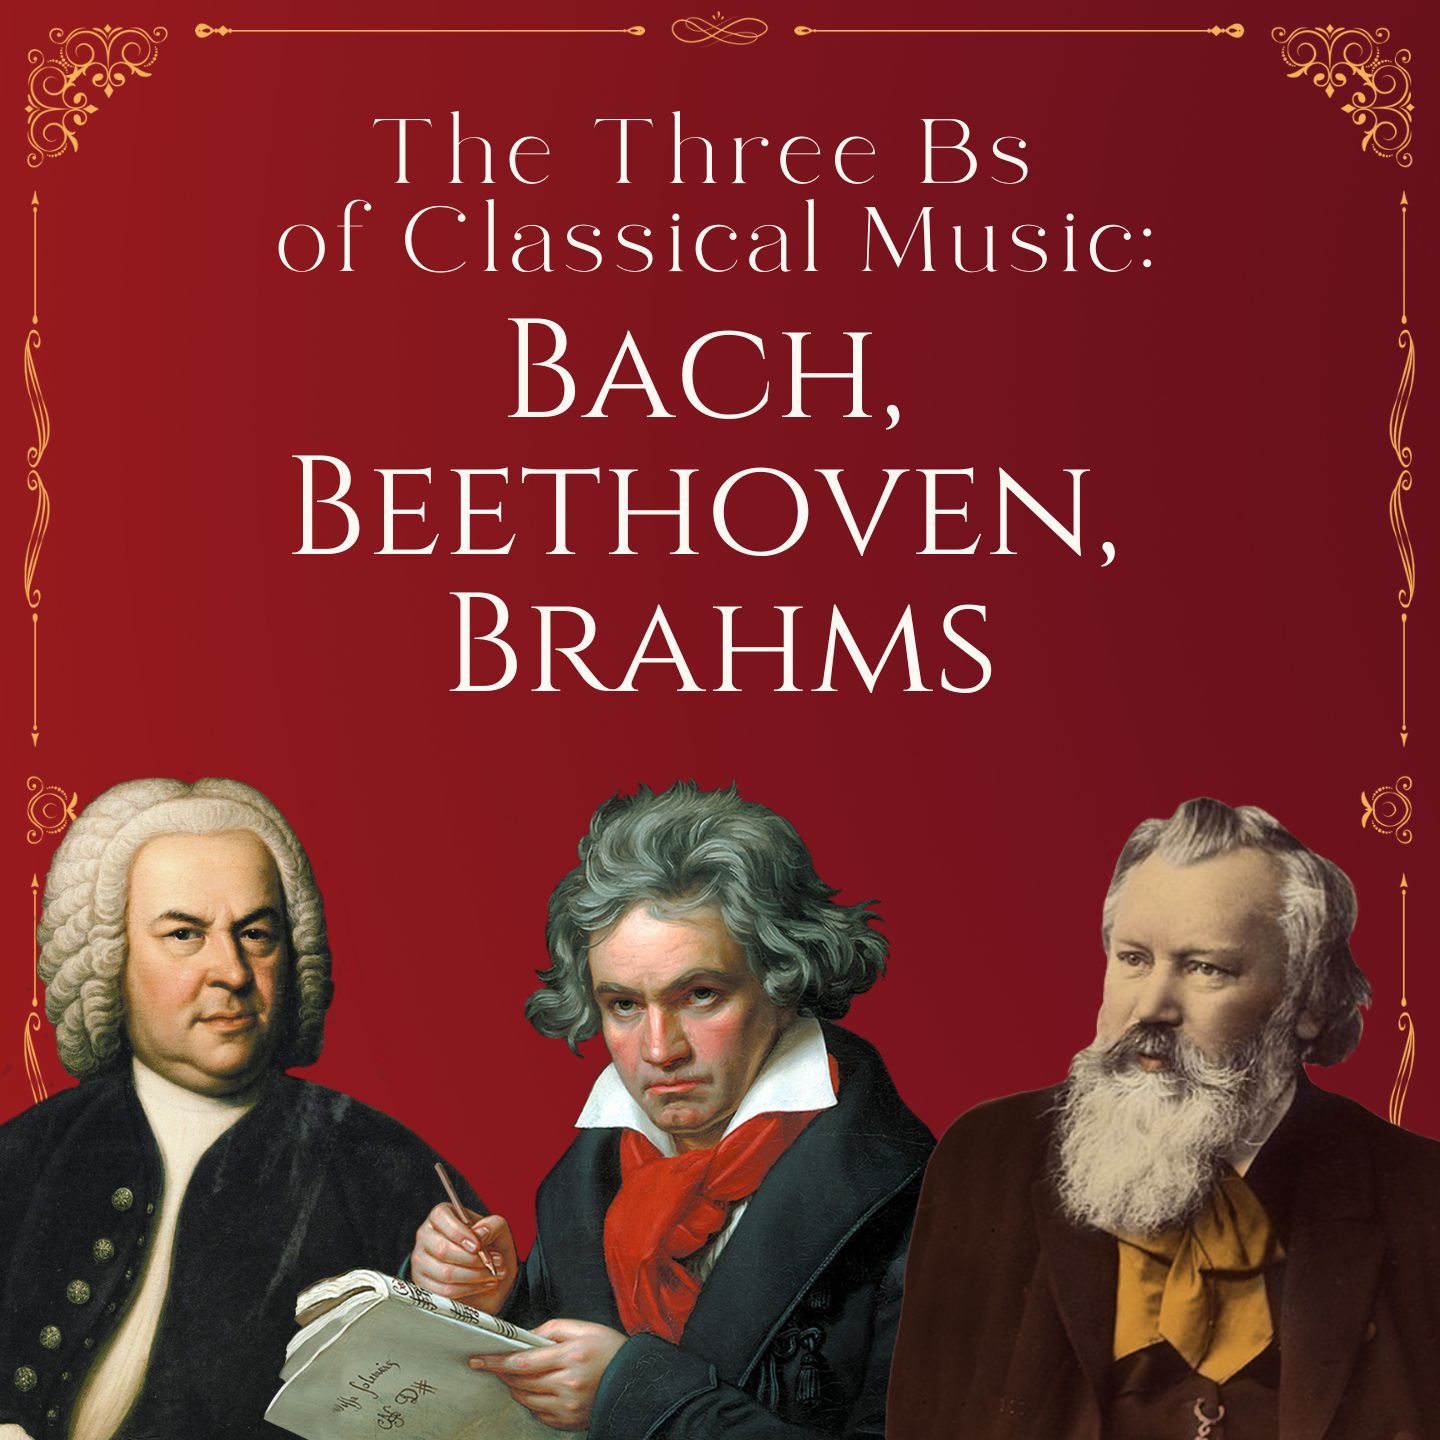 Bach, Beethoven, Brahms: The Three Bs of Classical Music